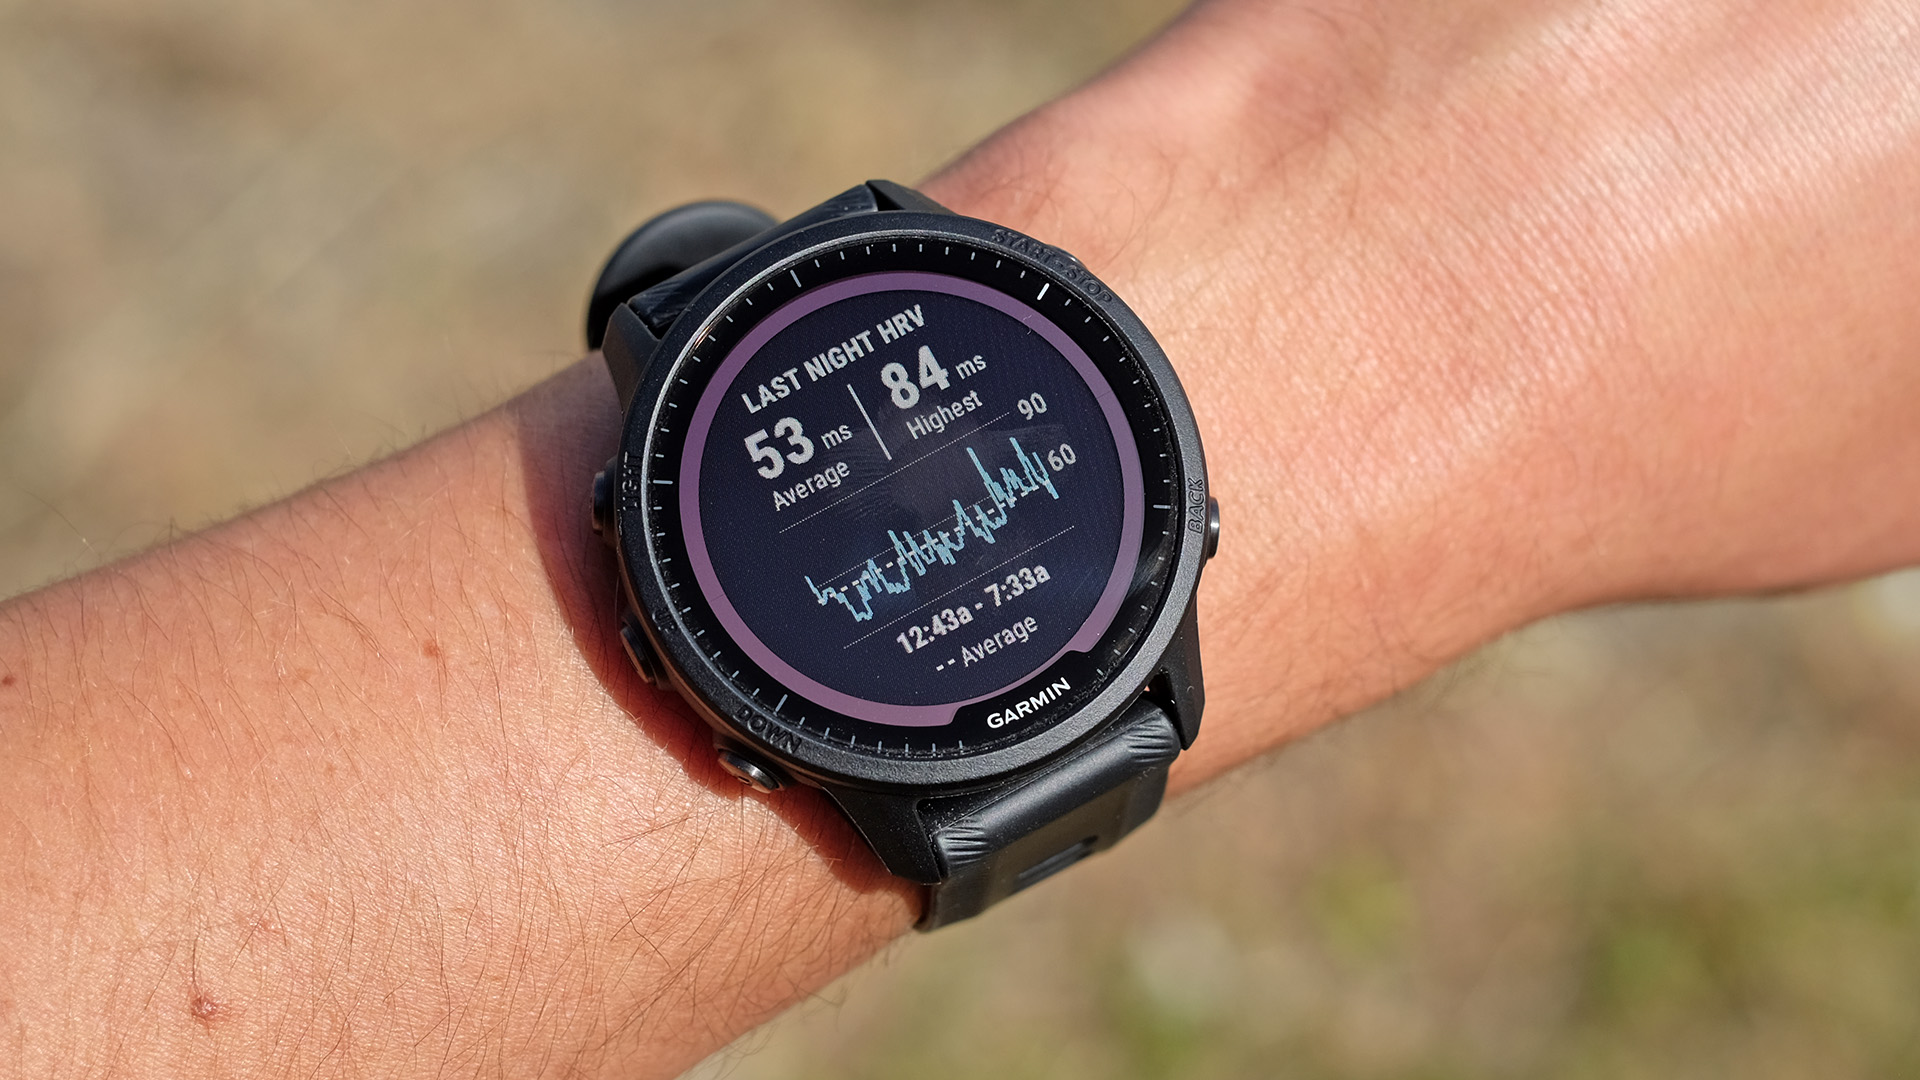 Garmin Forerunner 955 heart rate variability feature being tested on wrist